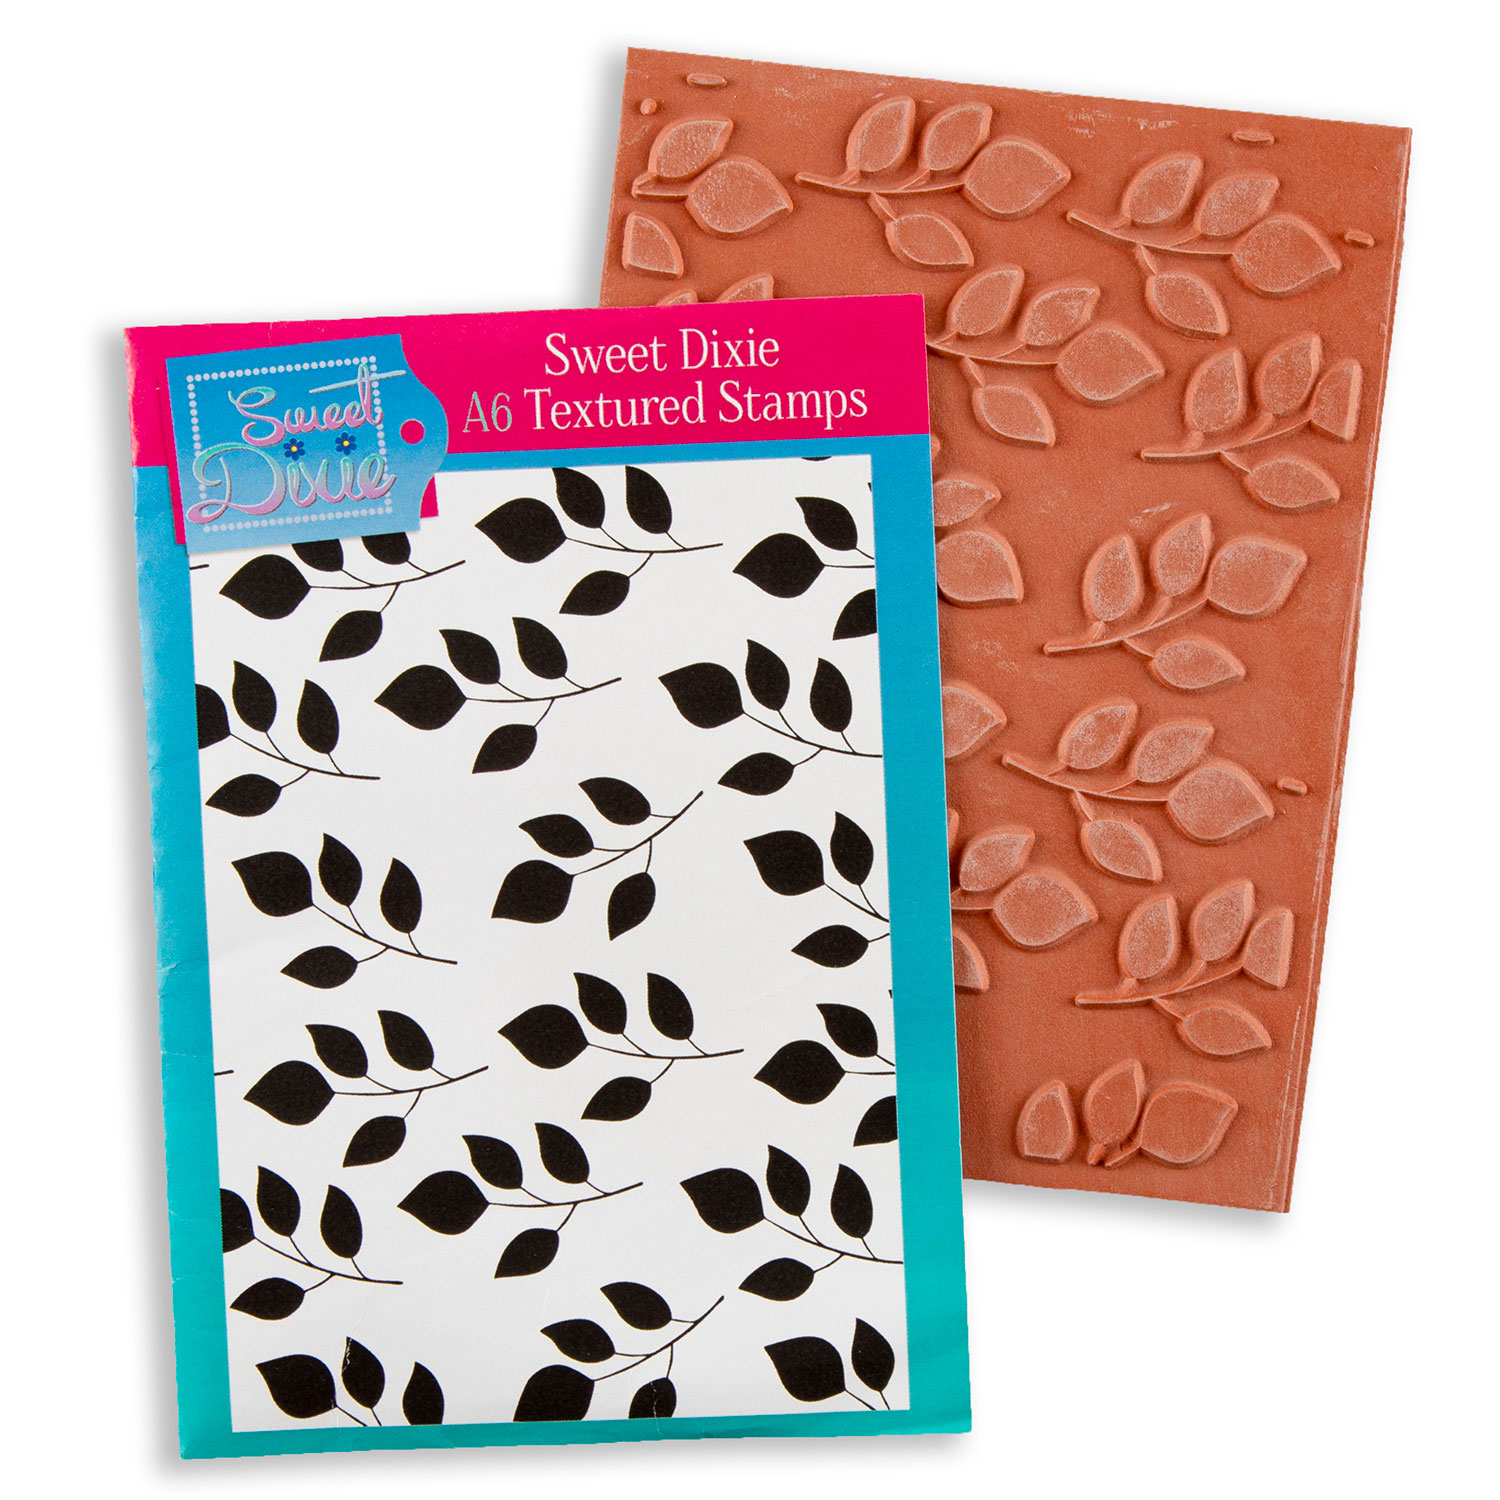 Sweet Dixie Texture Stamps Pick-n-Mix Choose 2 - Texture #3